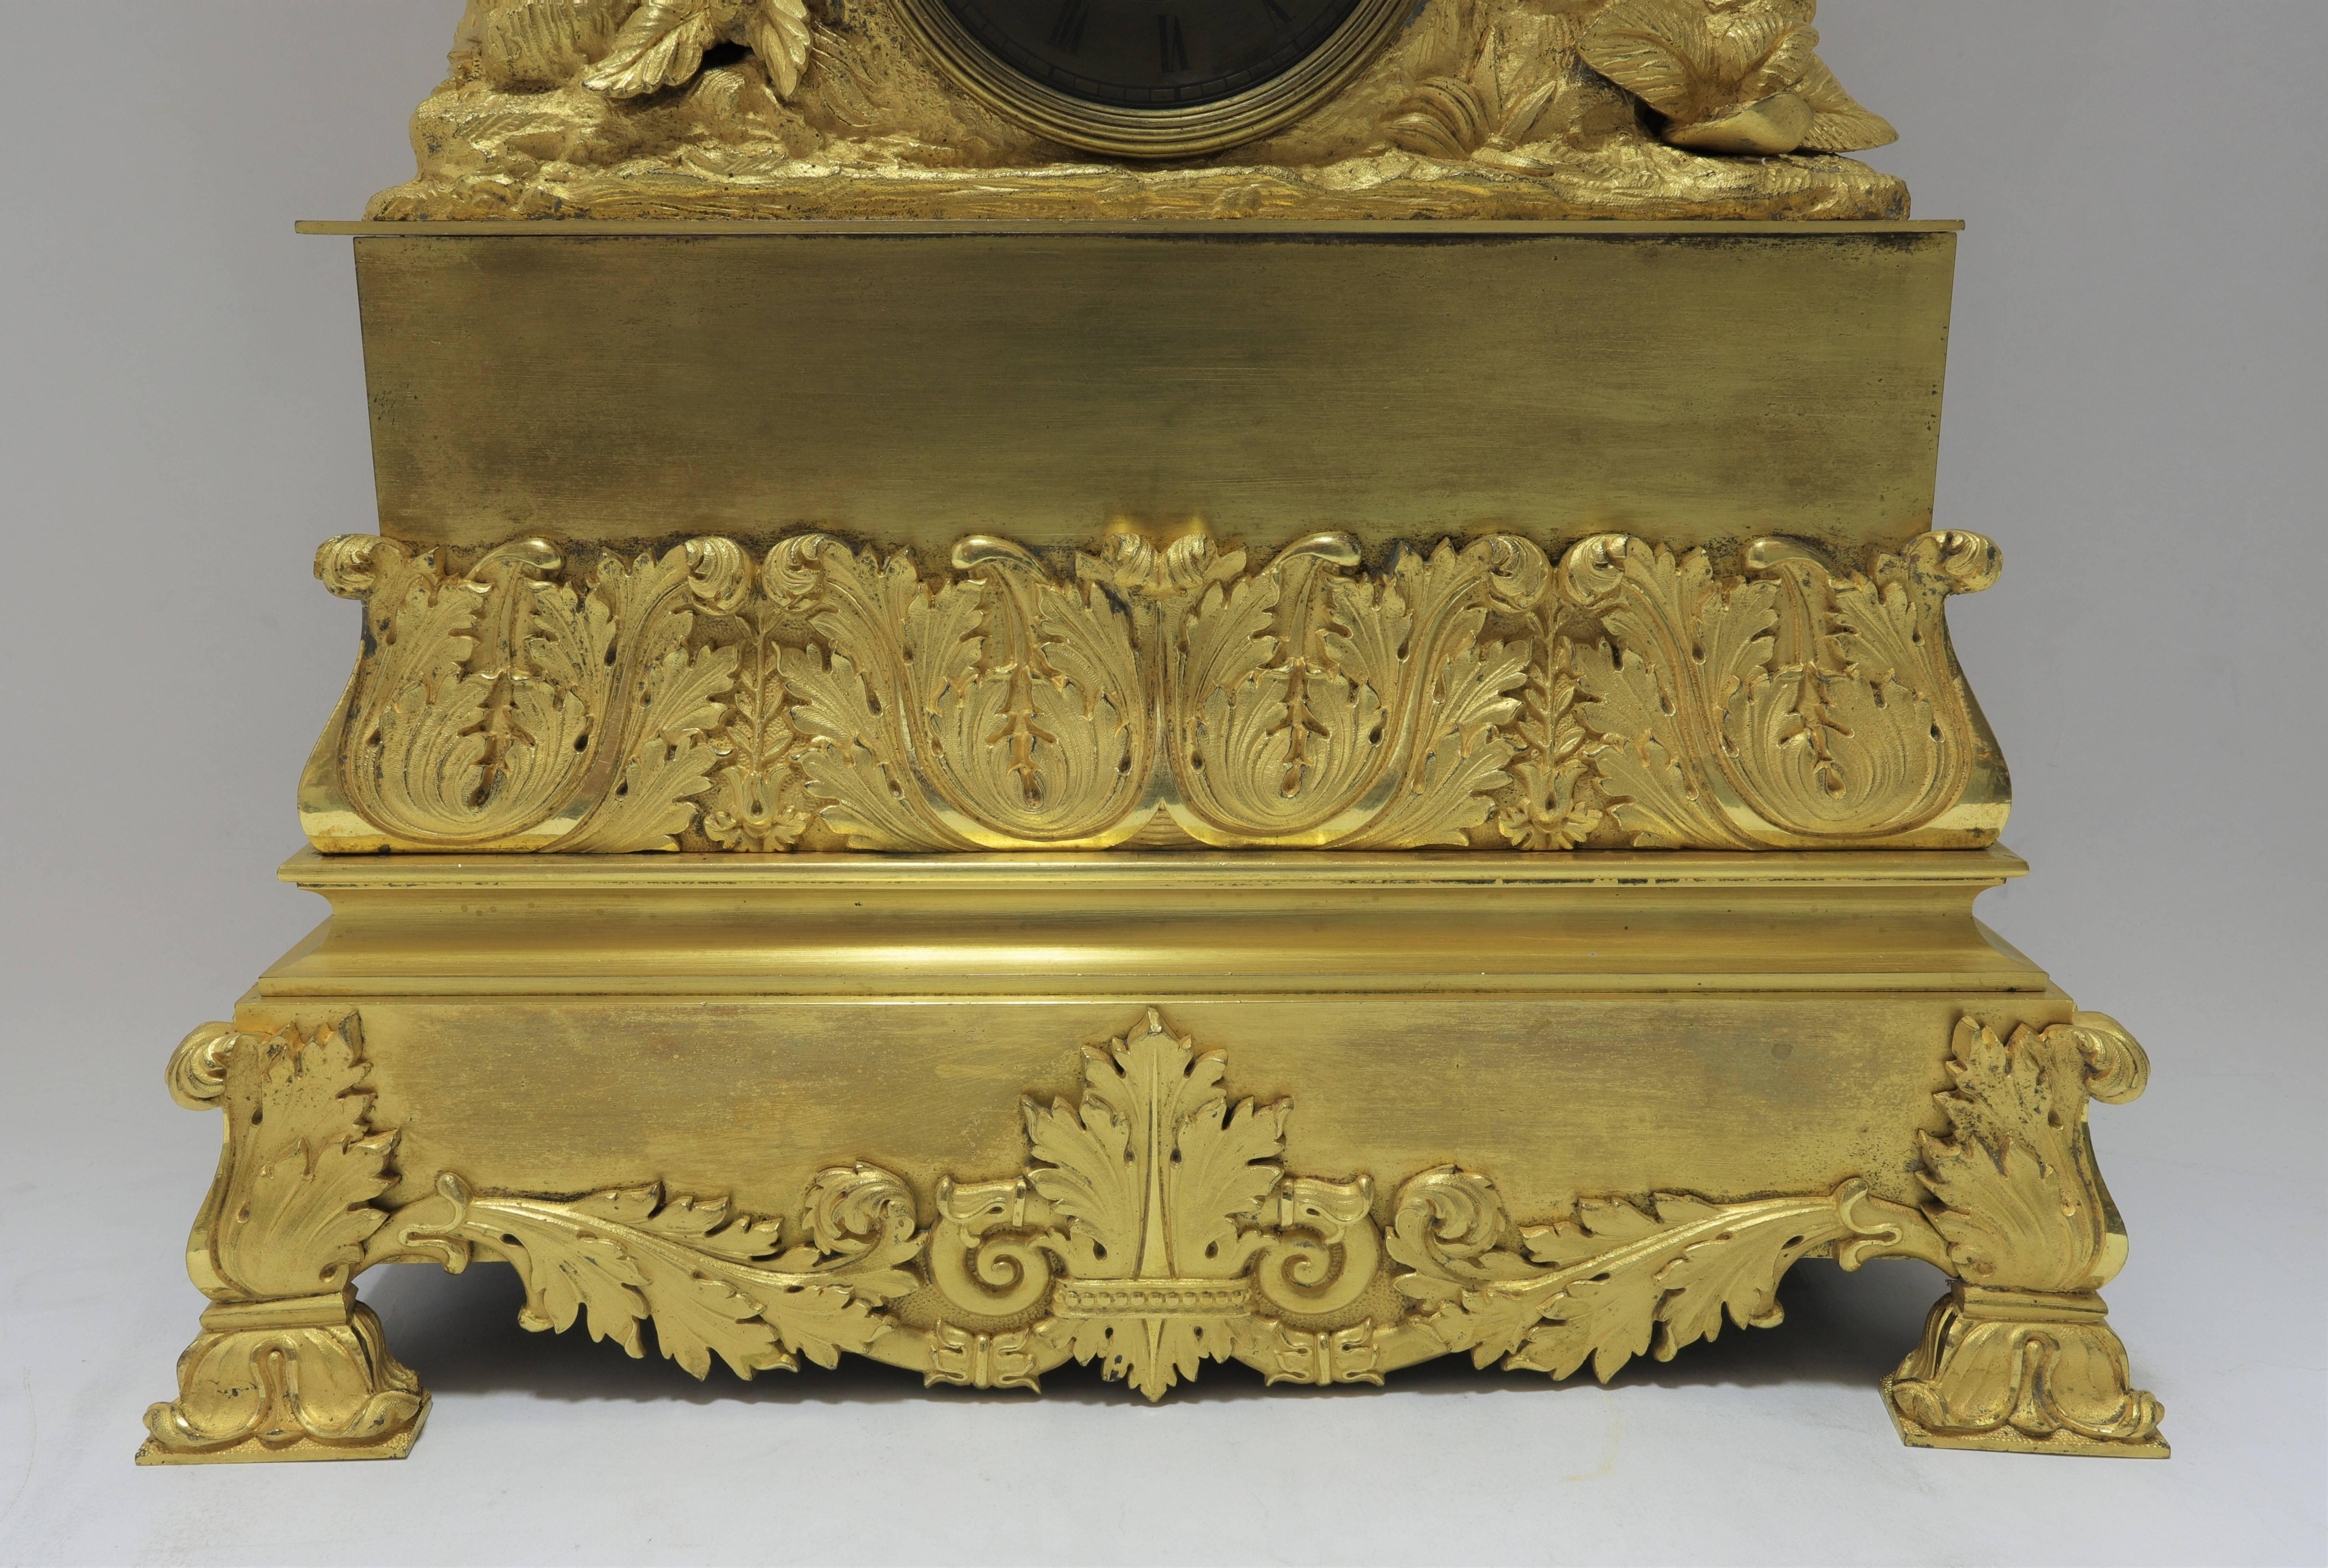 19th Century French Empire Gilt Bronze Clock Made for Turkish Market